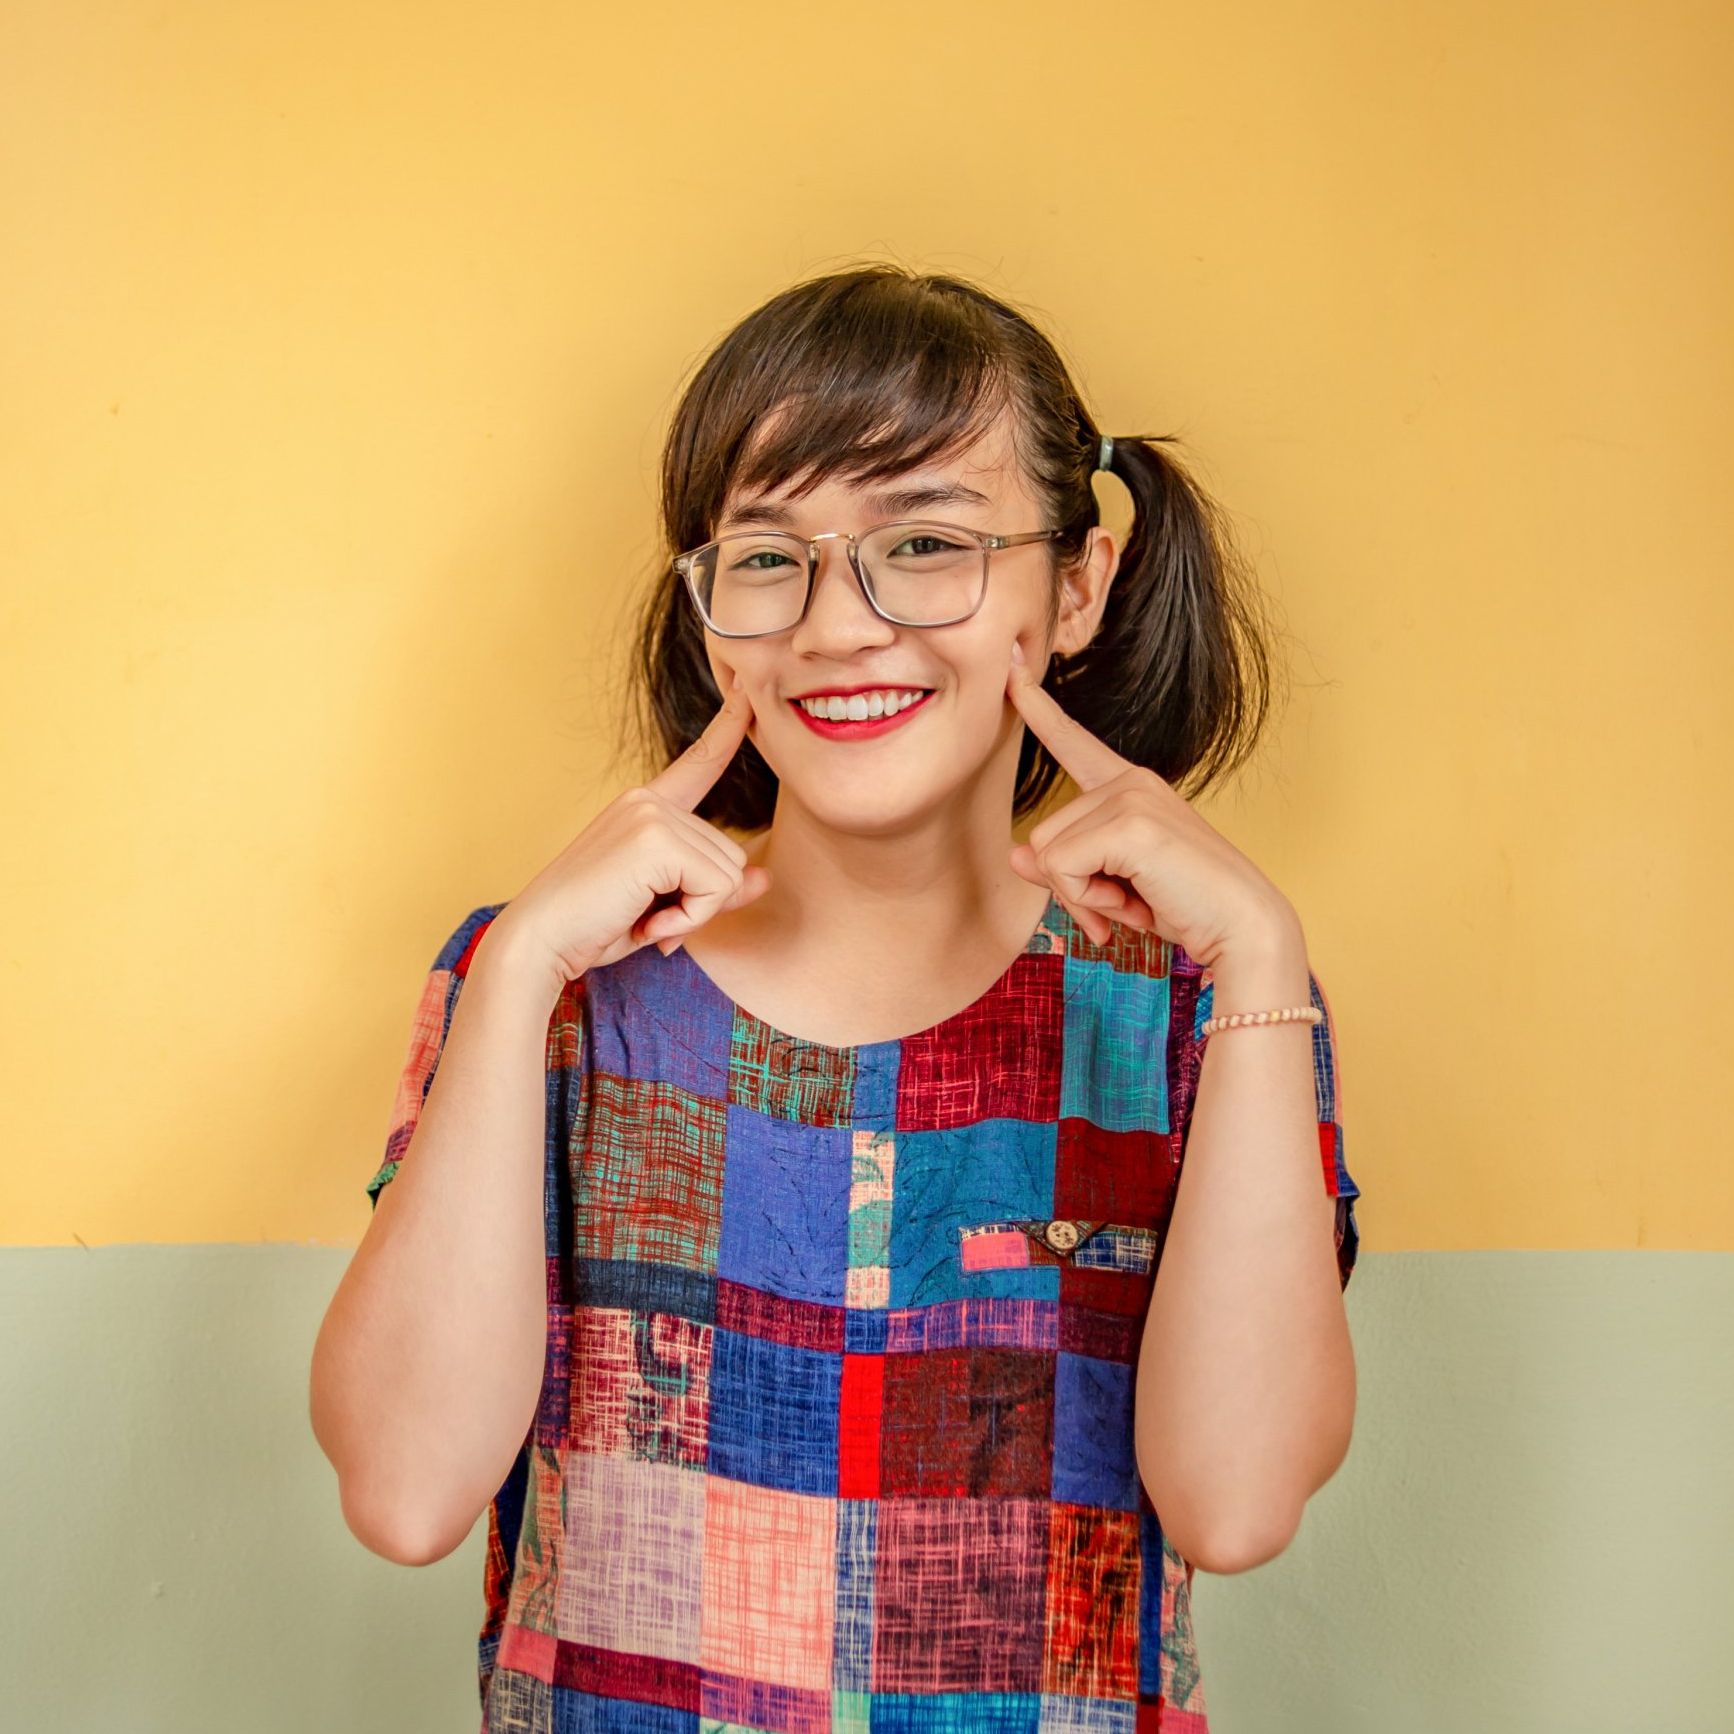 Woman with glasses and pigtails, pointing to her smile